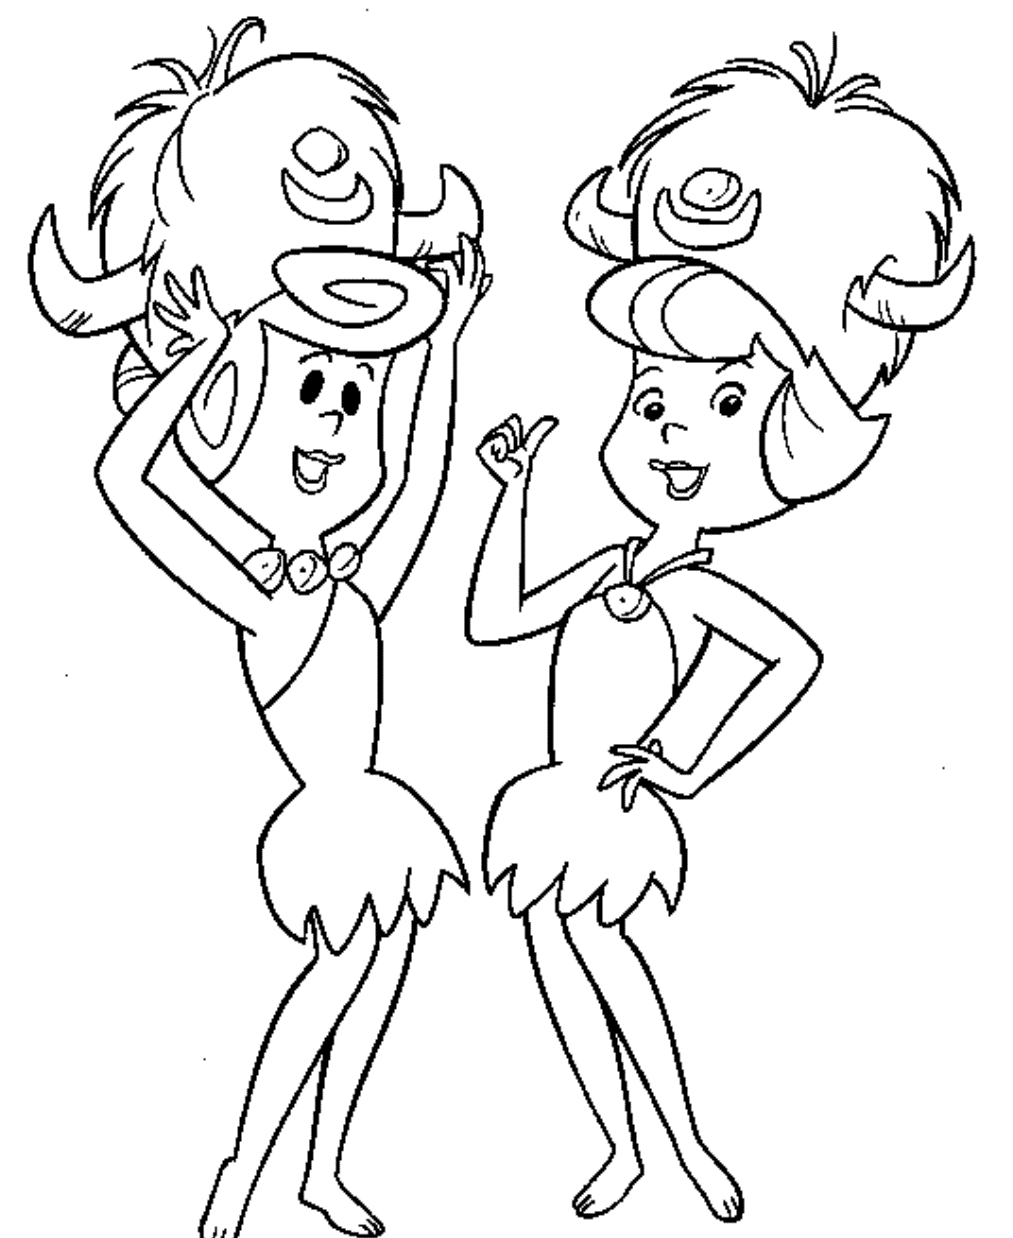 Flintstones Coloring Page Cartoon Coloring Page Coloring Home 65331 Hot Sex Picture